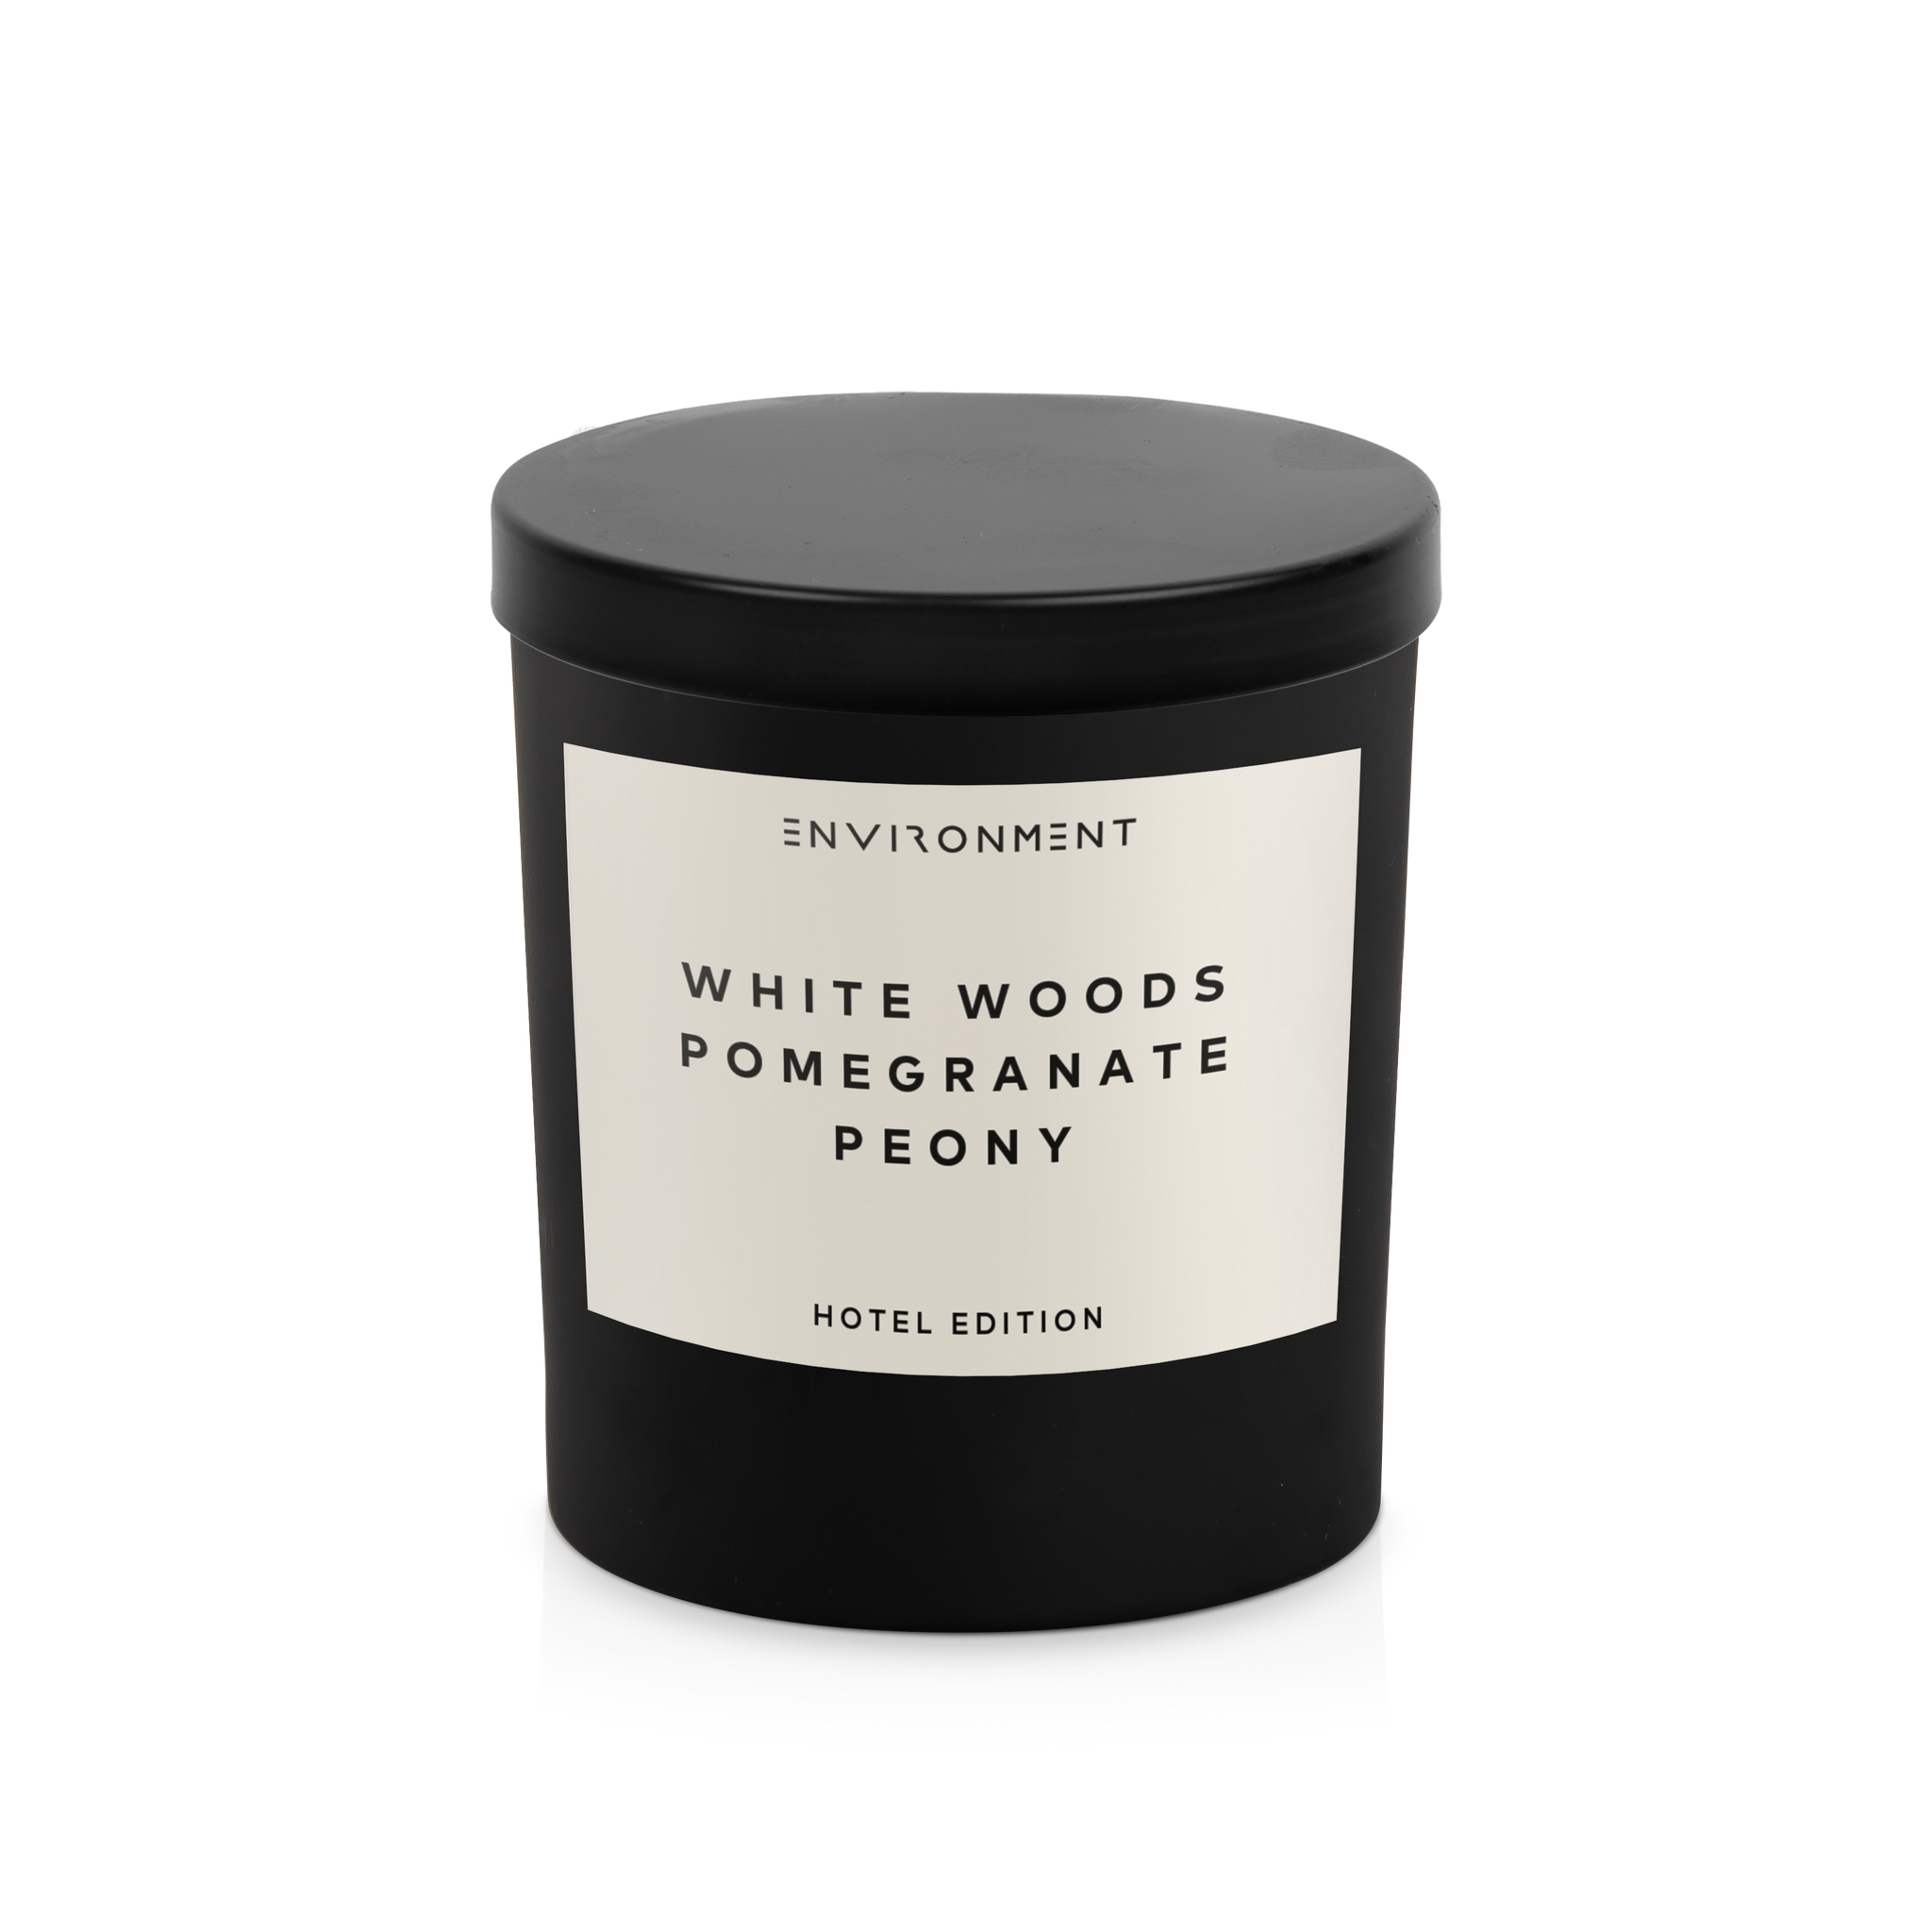 8oz White Woods | Pomegranate | Peony Candle with Lid and Box (Inspired by The Aria Hotel®)